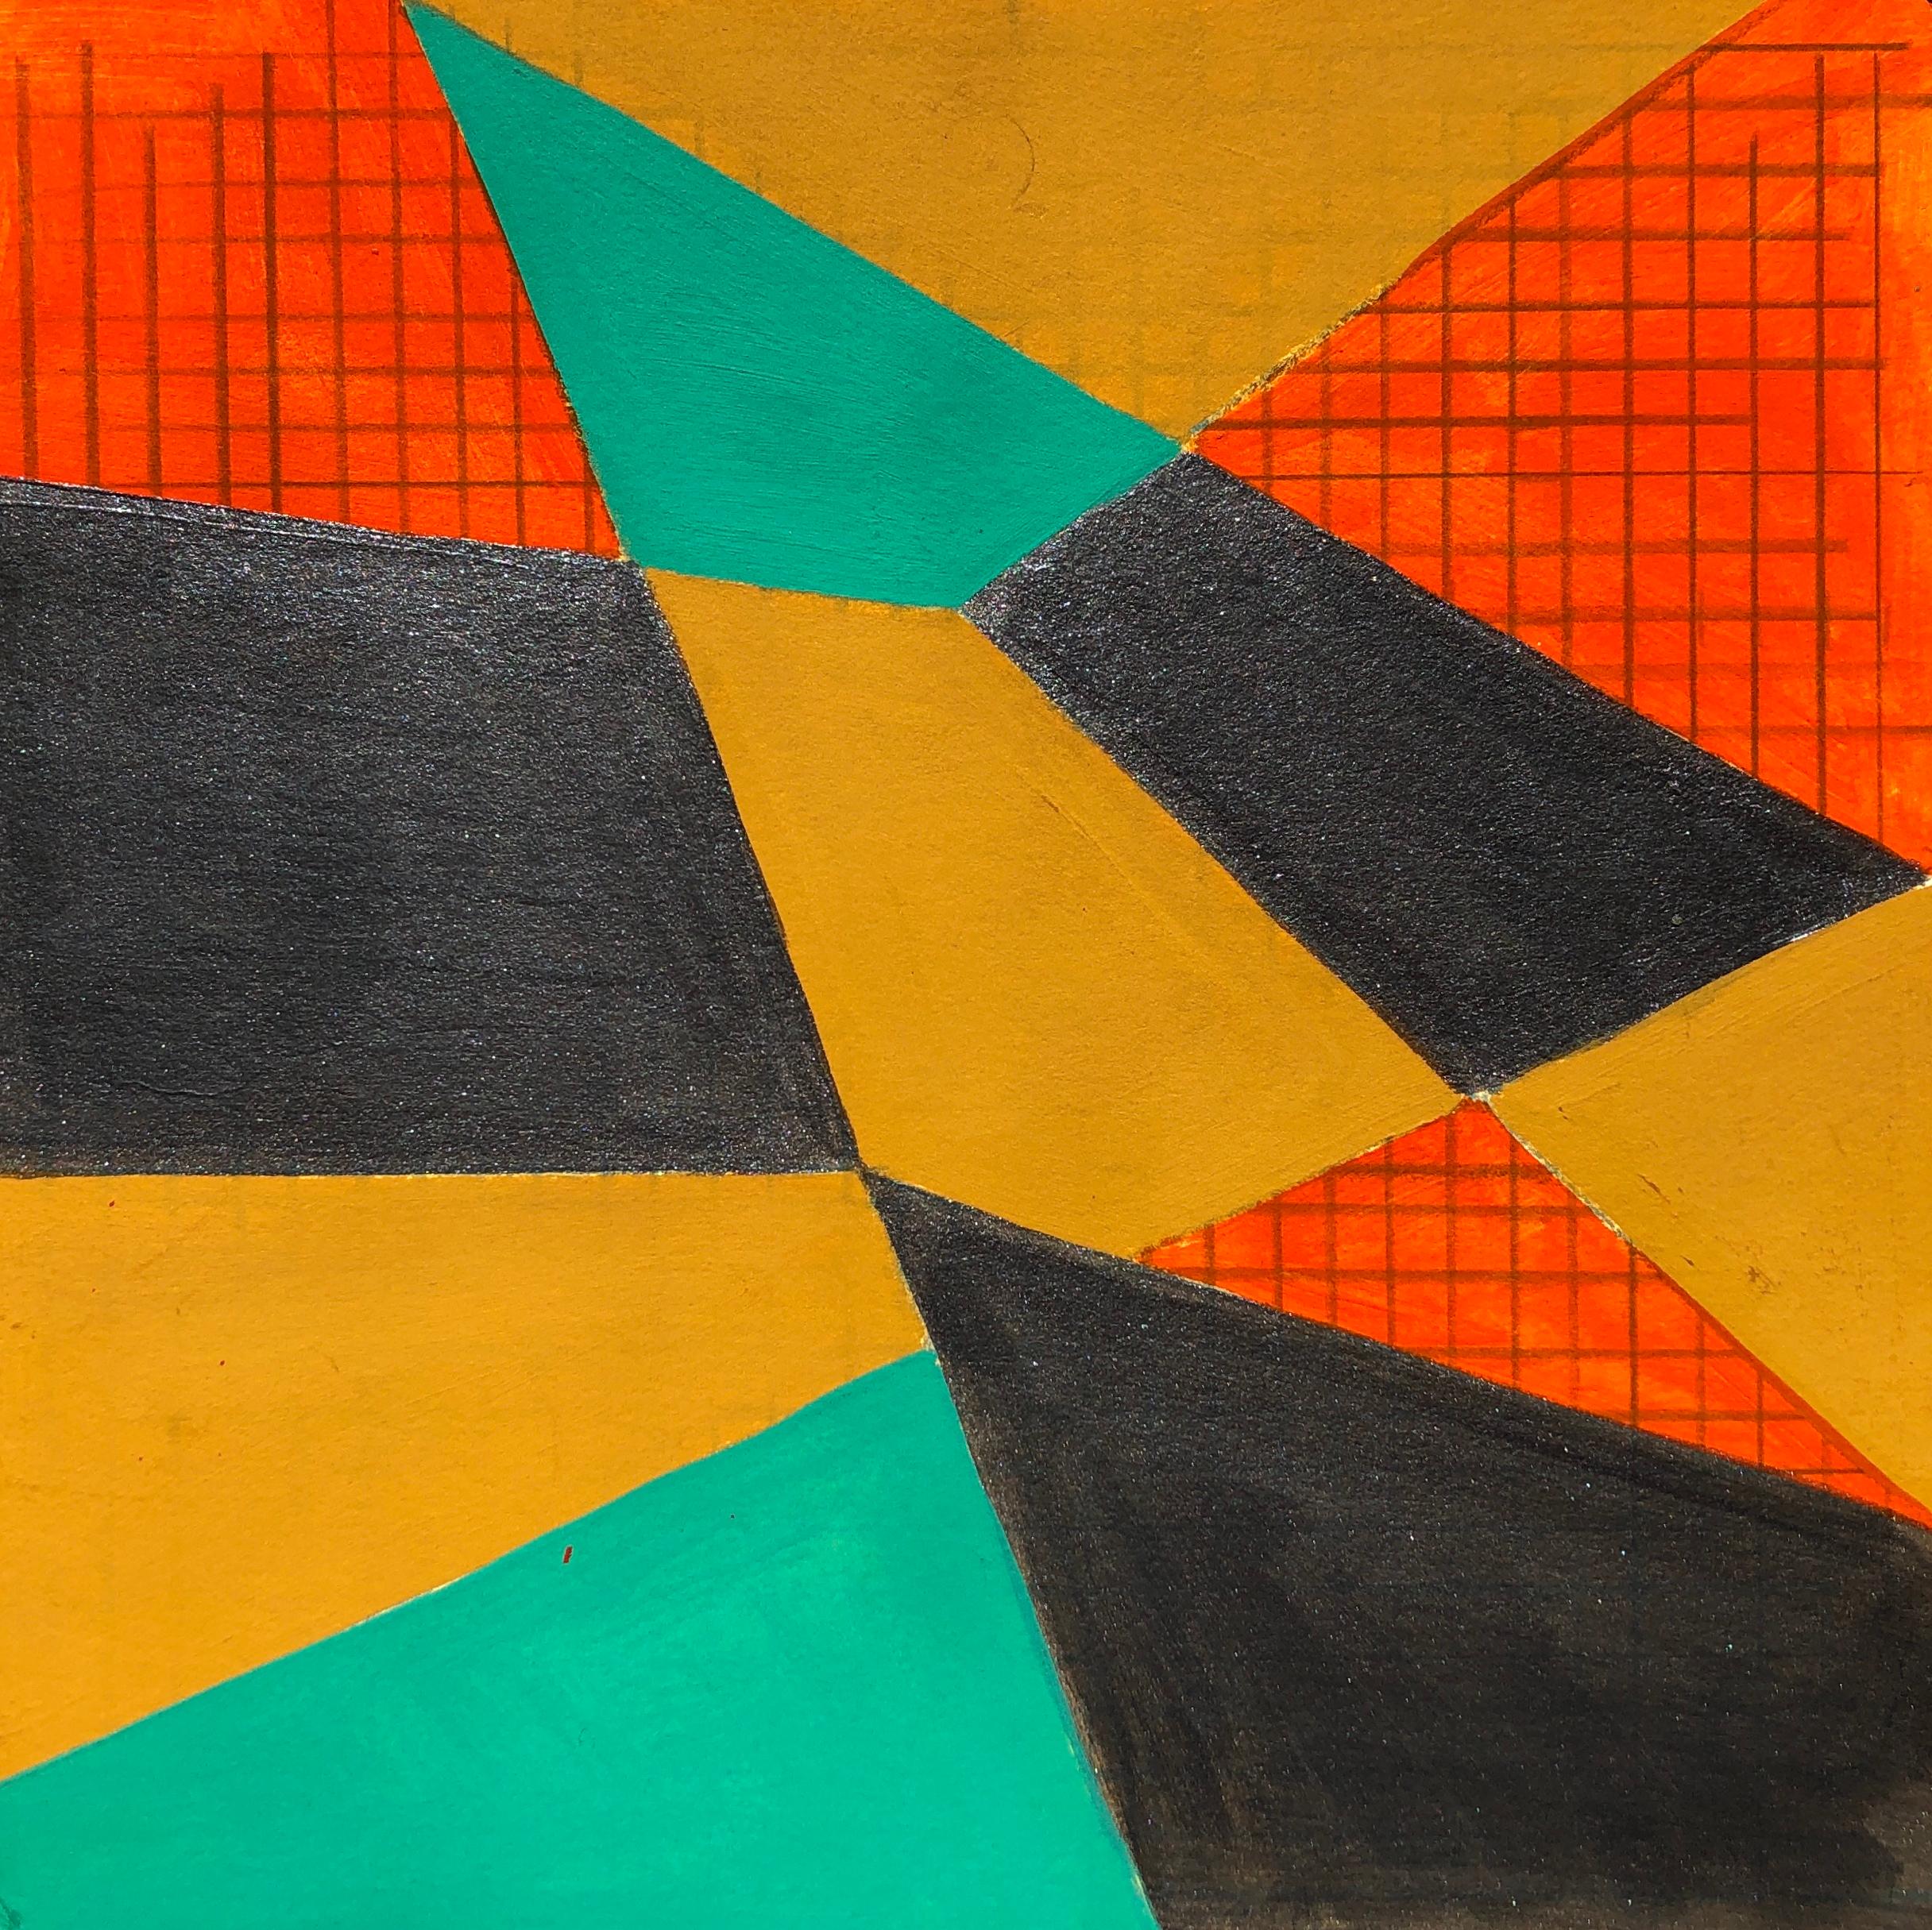 B2, abstract geometric pattern, mixed media on paper, green, yellow and red